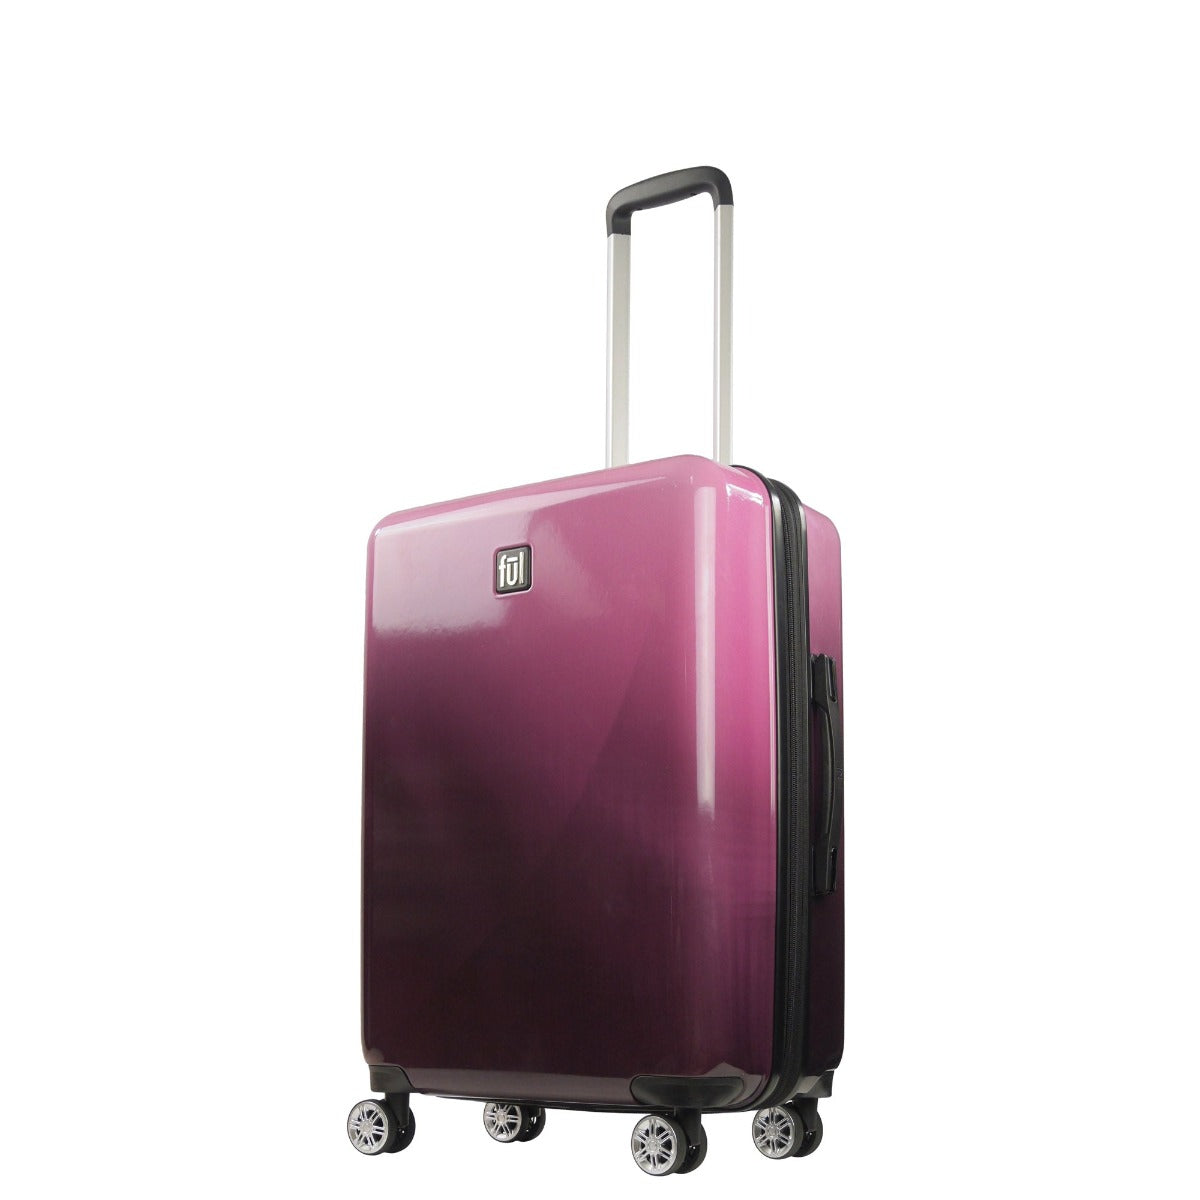 Ful Impulse Ombre Hardside Suitcase 26" Luggage Pink 360 degree spinner wheels 2” expansion divider panel